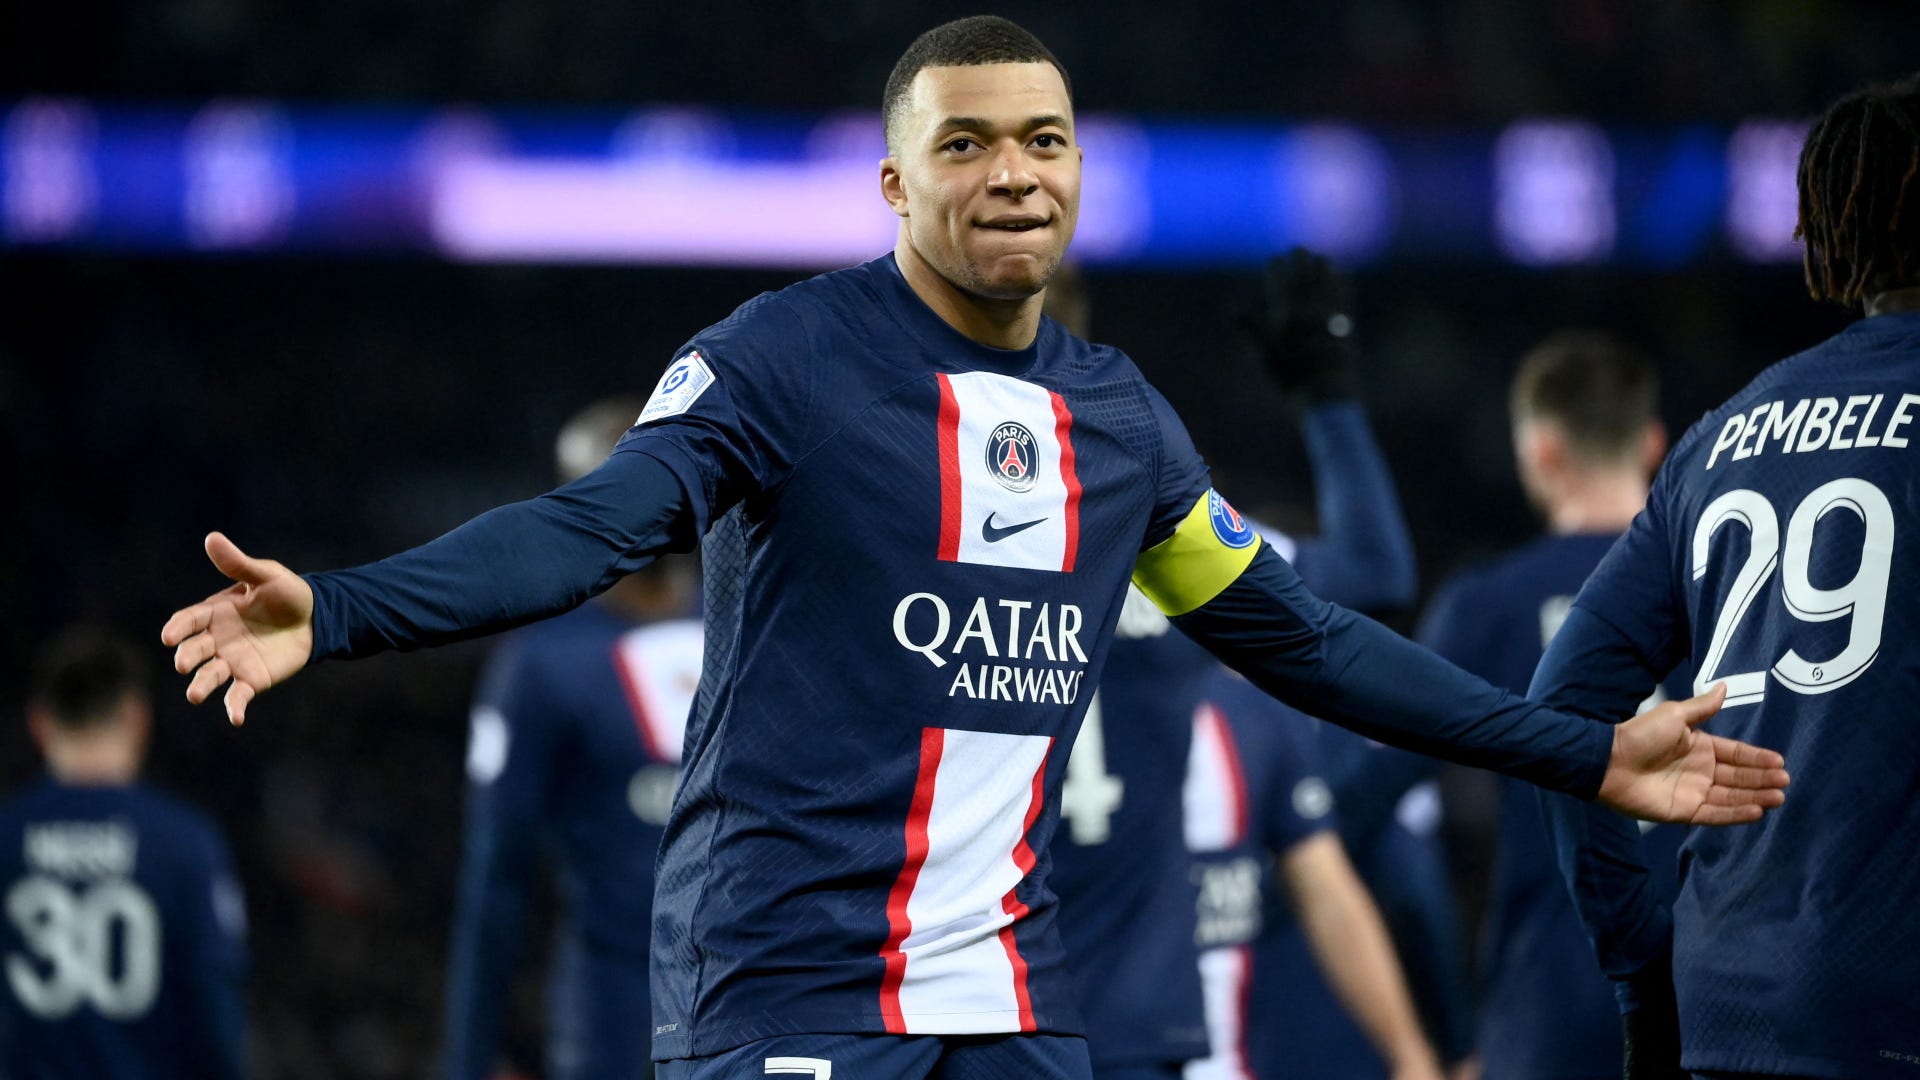 I play to write history' - Kylian Mbappe reflects on breaking PSG's  all-time goalscoring record with strike against Nantes | Goal.com US